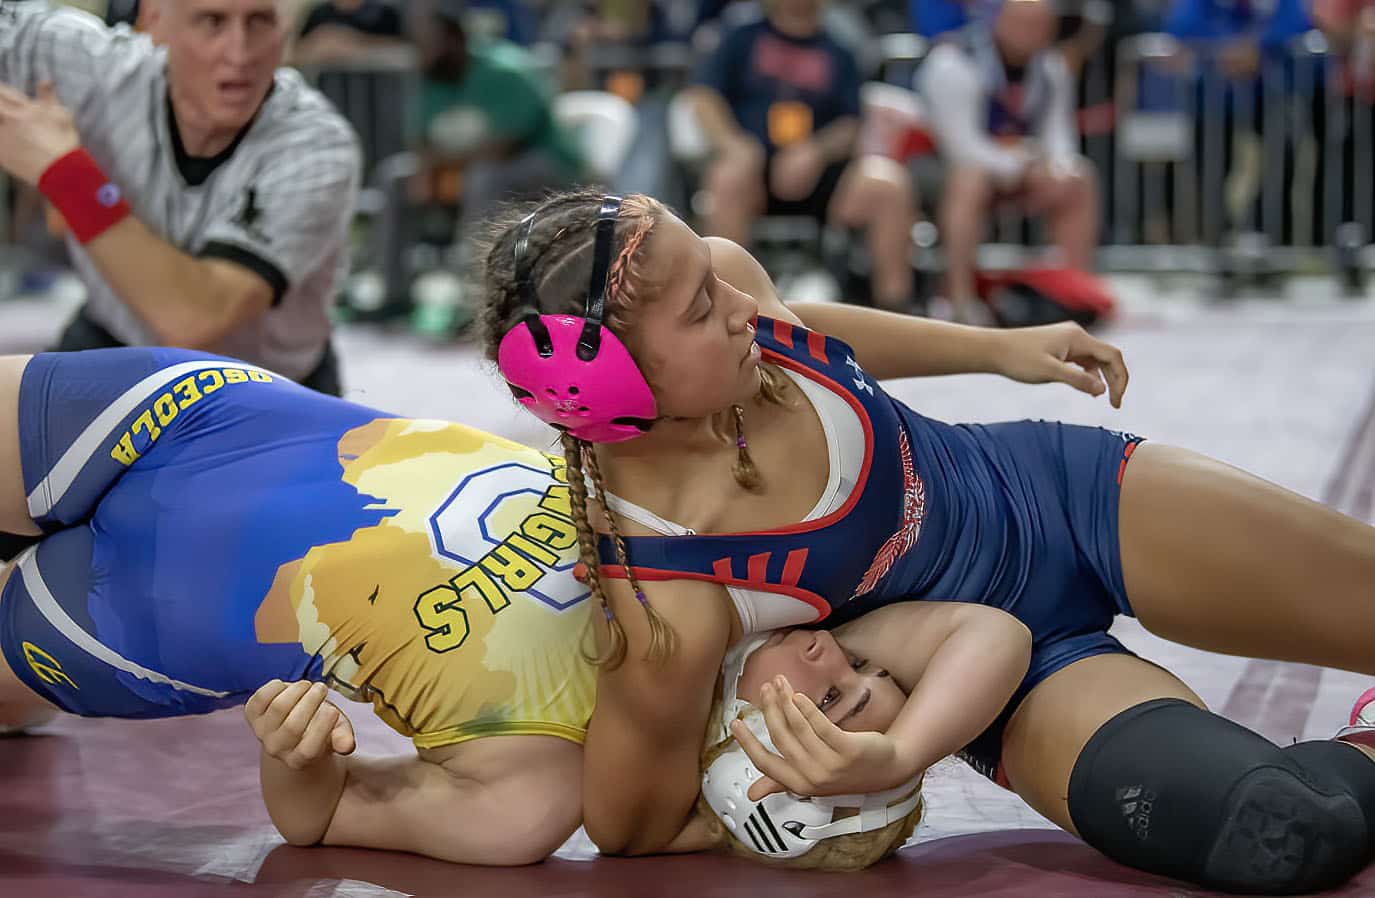 Springstead High’s 120-pound competitor, Jasmine Serrano, won over Paola Ramirez from Osceola in a consolation match at the FHSAA IBT Championships in Kissimmee. Photo by JOE DiCRISTOFALO